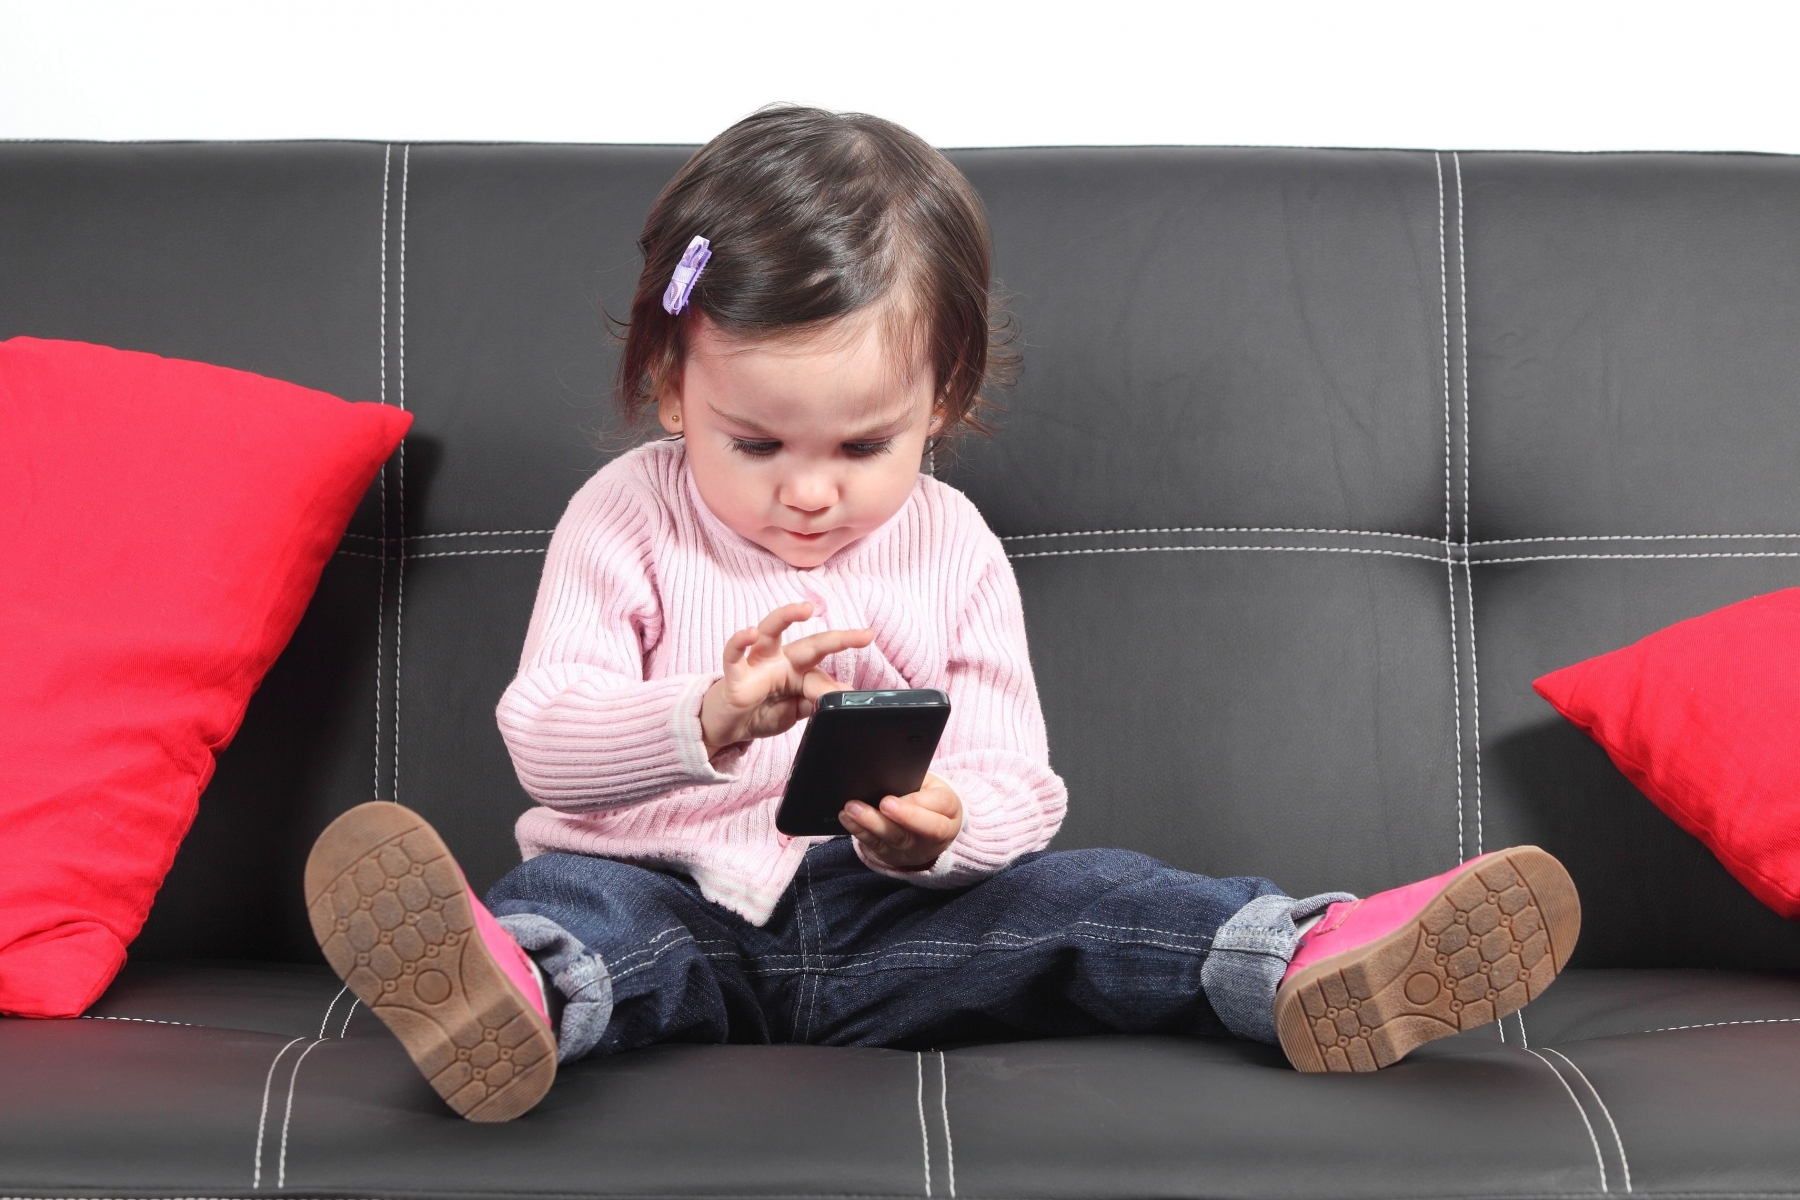 Casual baby sitting on a couch at home playing and touching a mobile phone Casual baby sitting on a couch touching a mobile phone